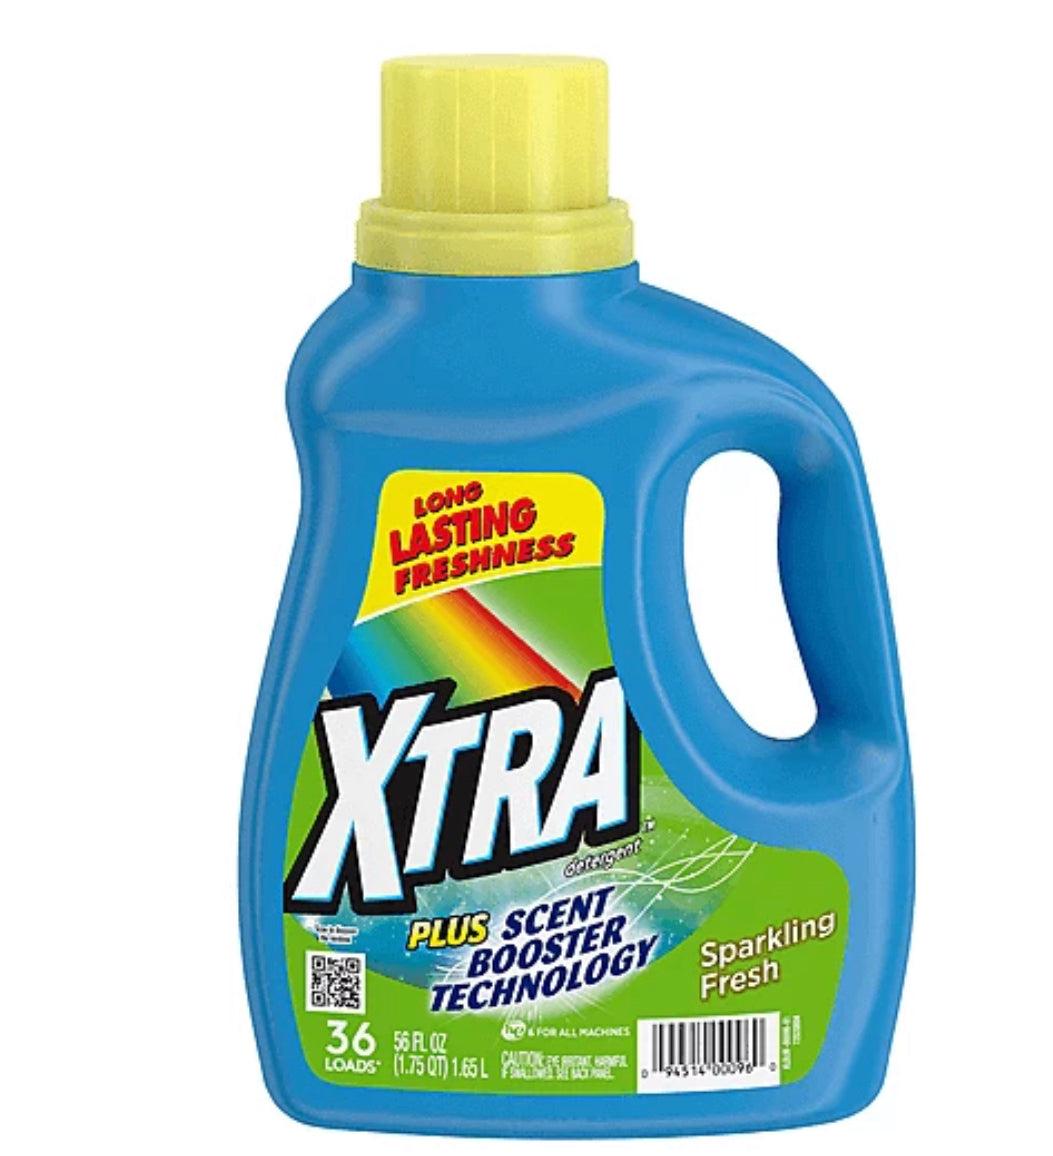 Xtra Sparkling Fresh Plus Scent Booster Technology 56oz